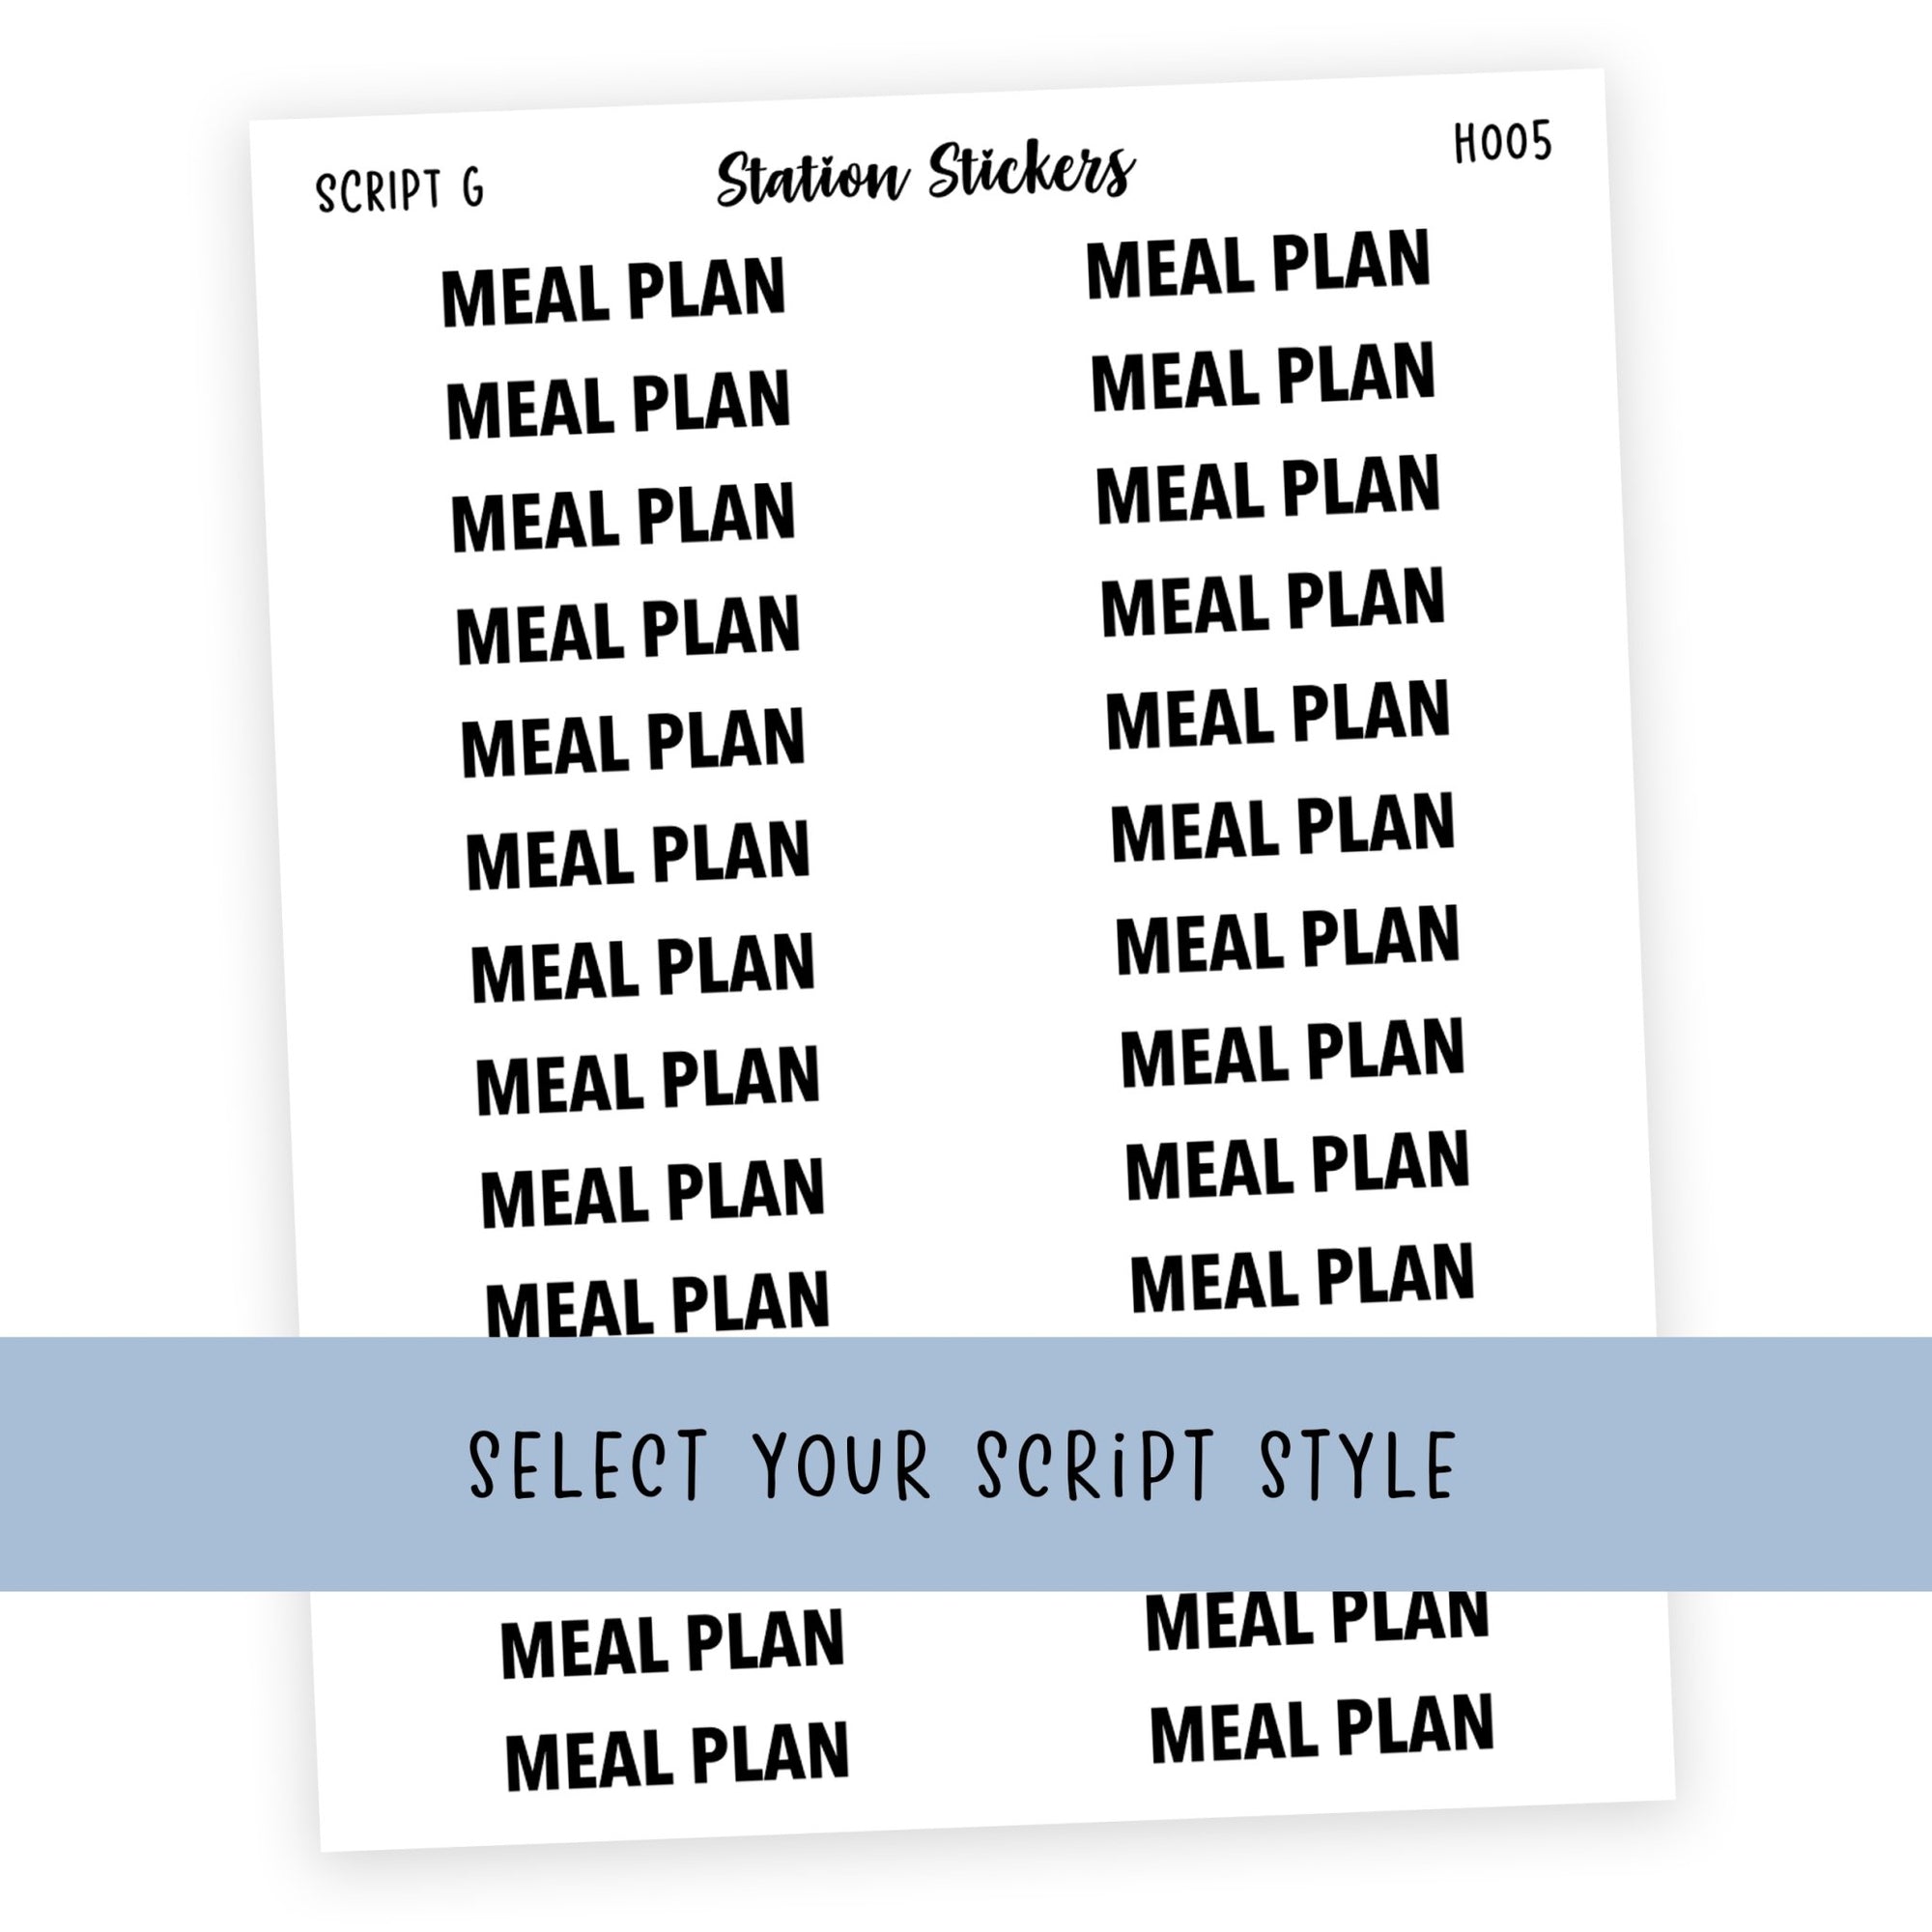 HEADER • MEAL PLAN - Station Stickers